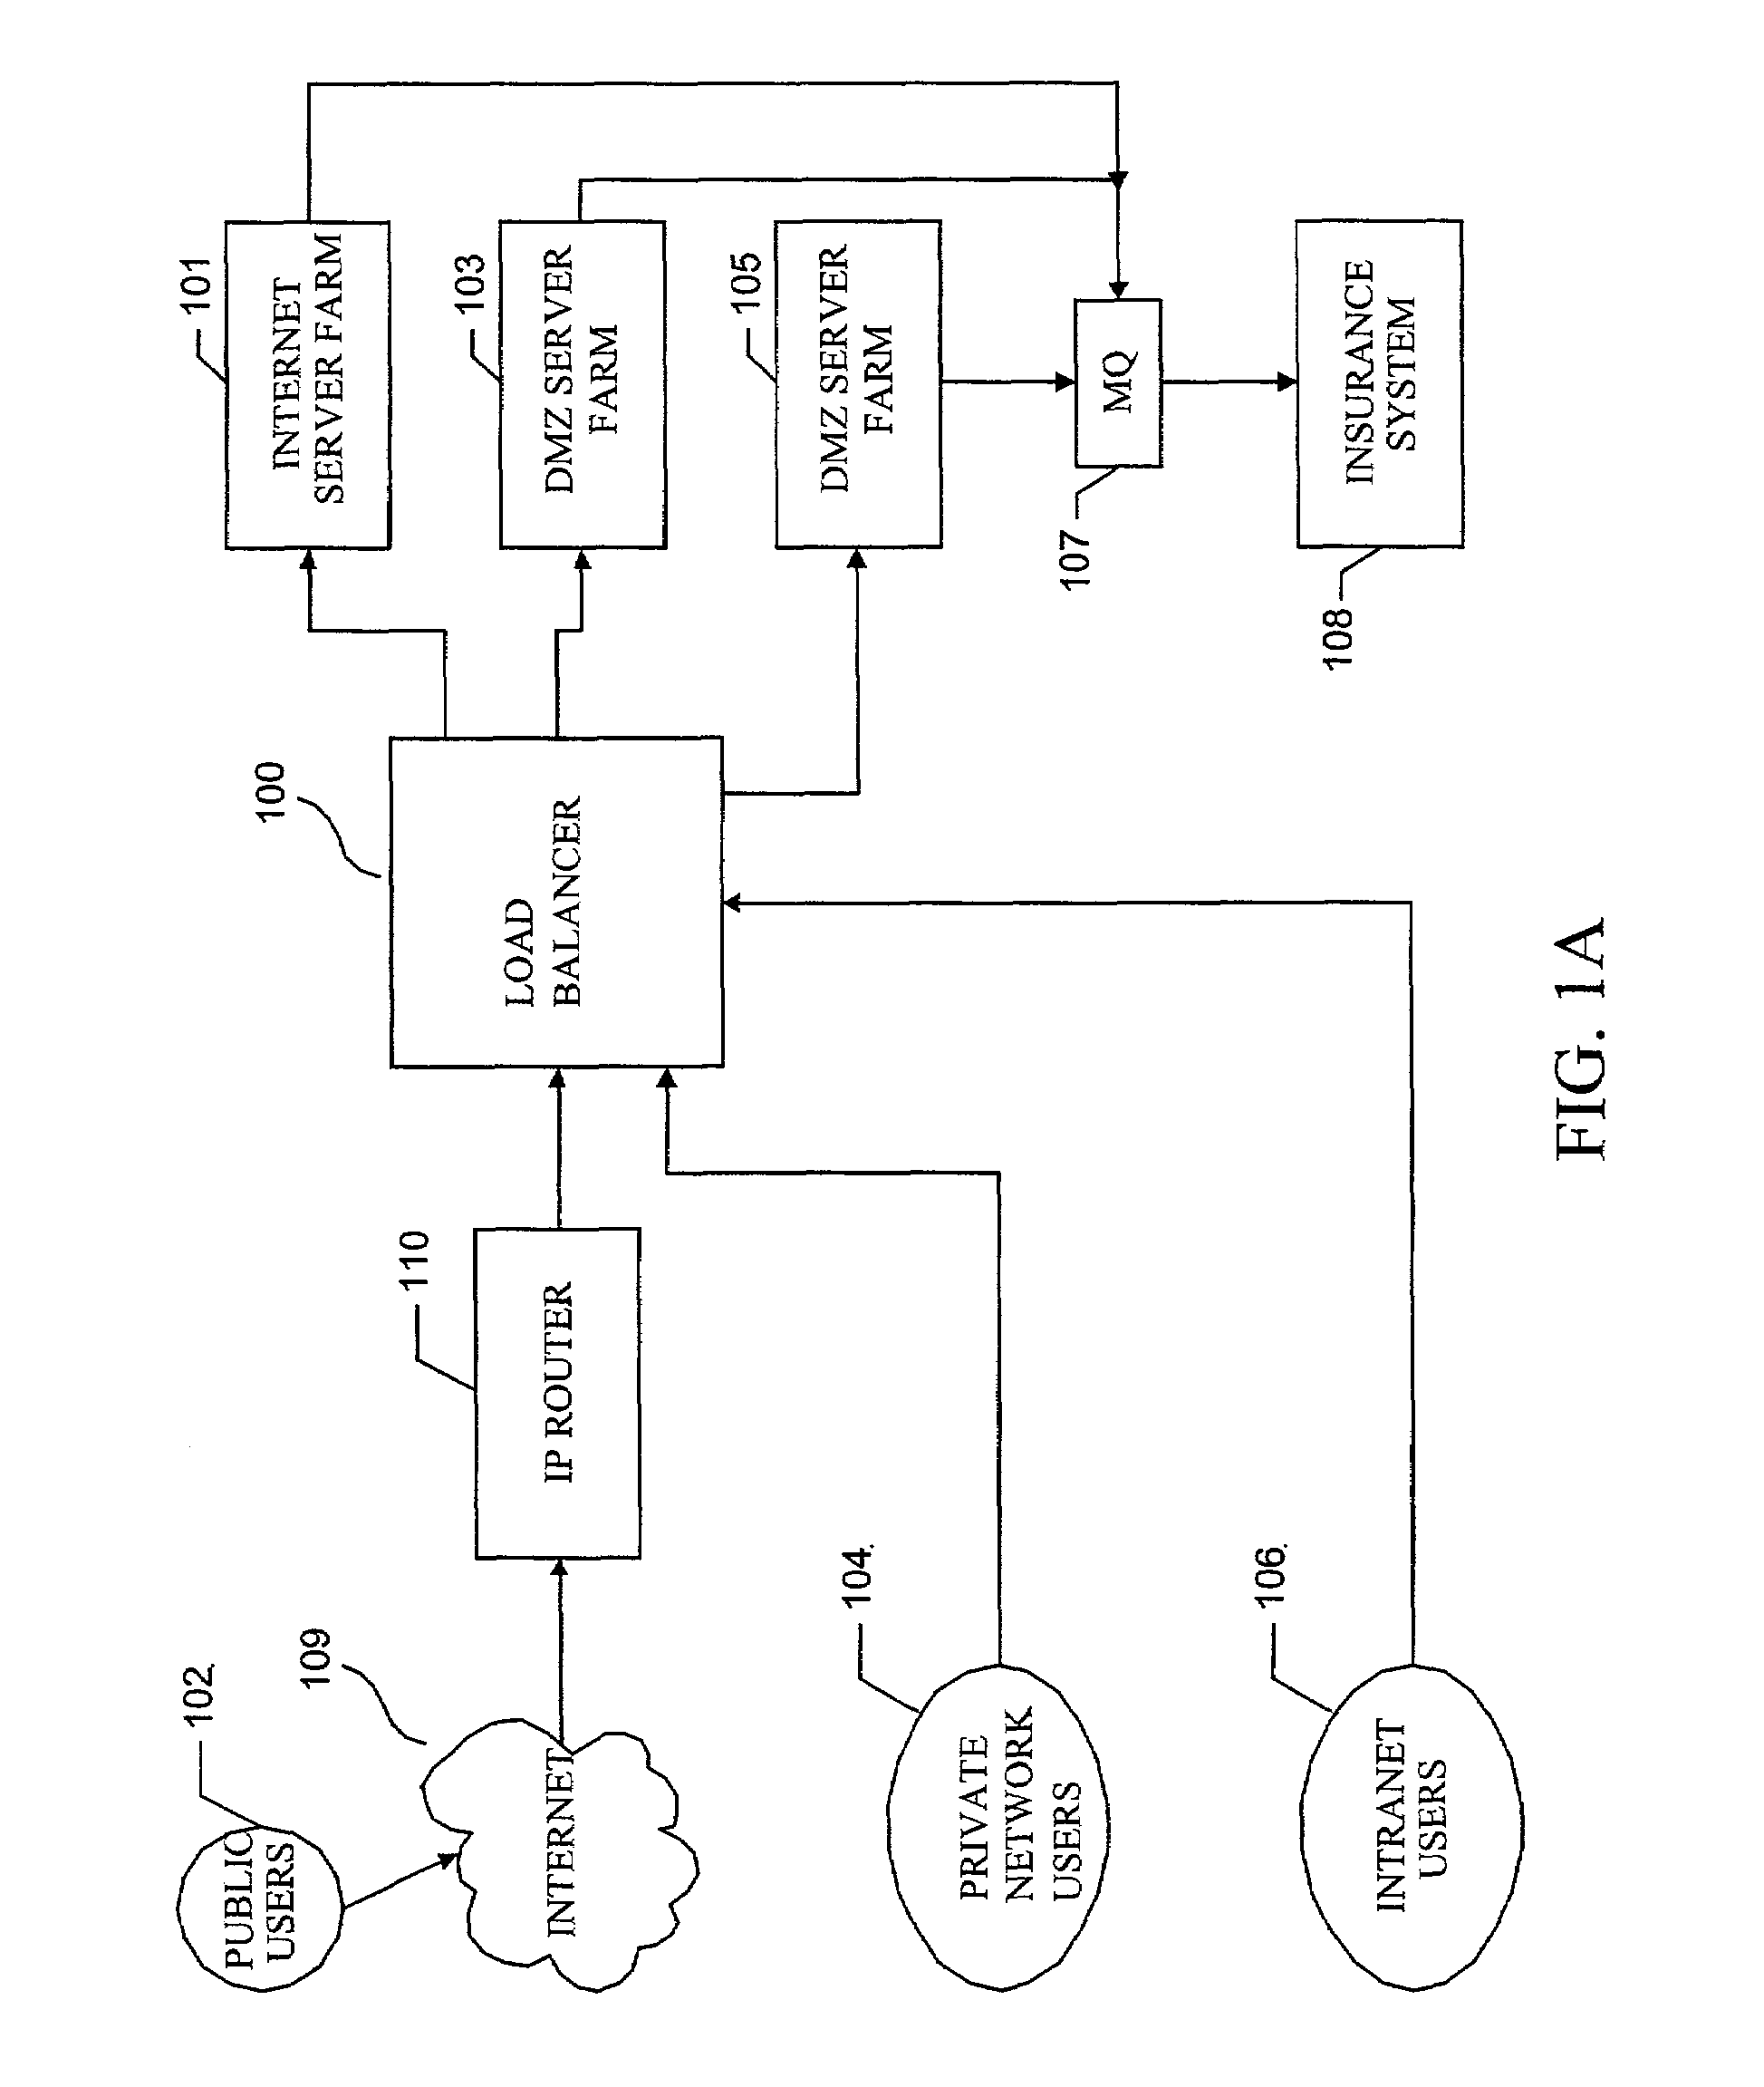 System and method for providing web-based user interface to legacy, personal-lines insurance applications